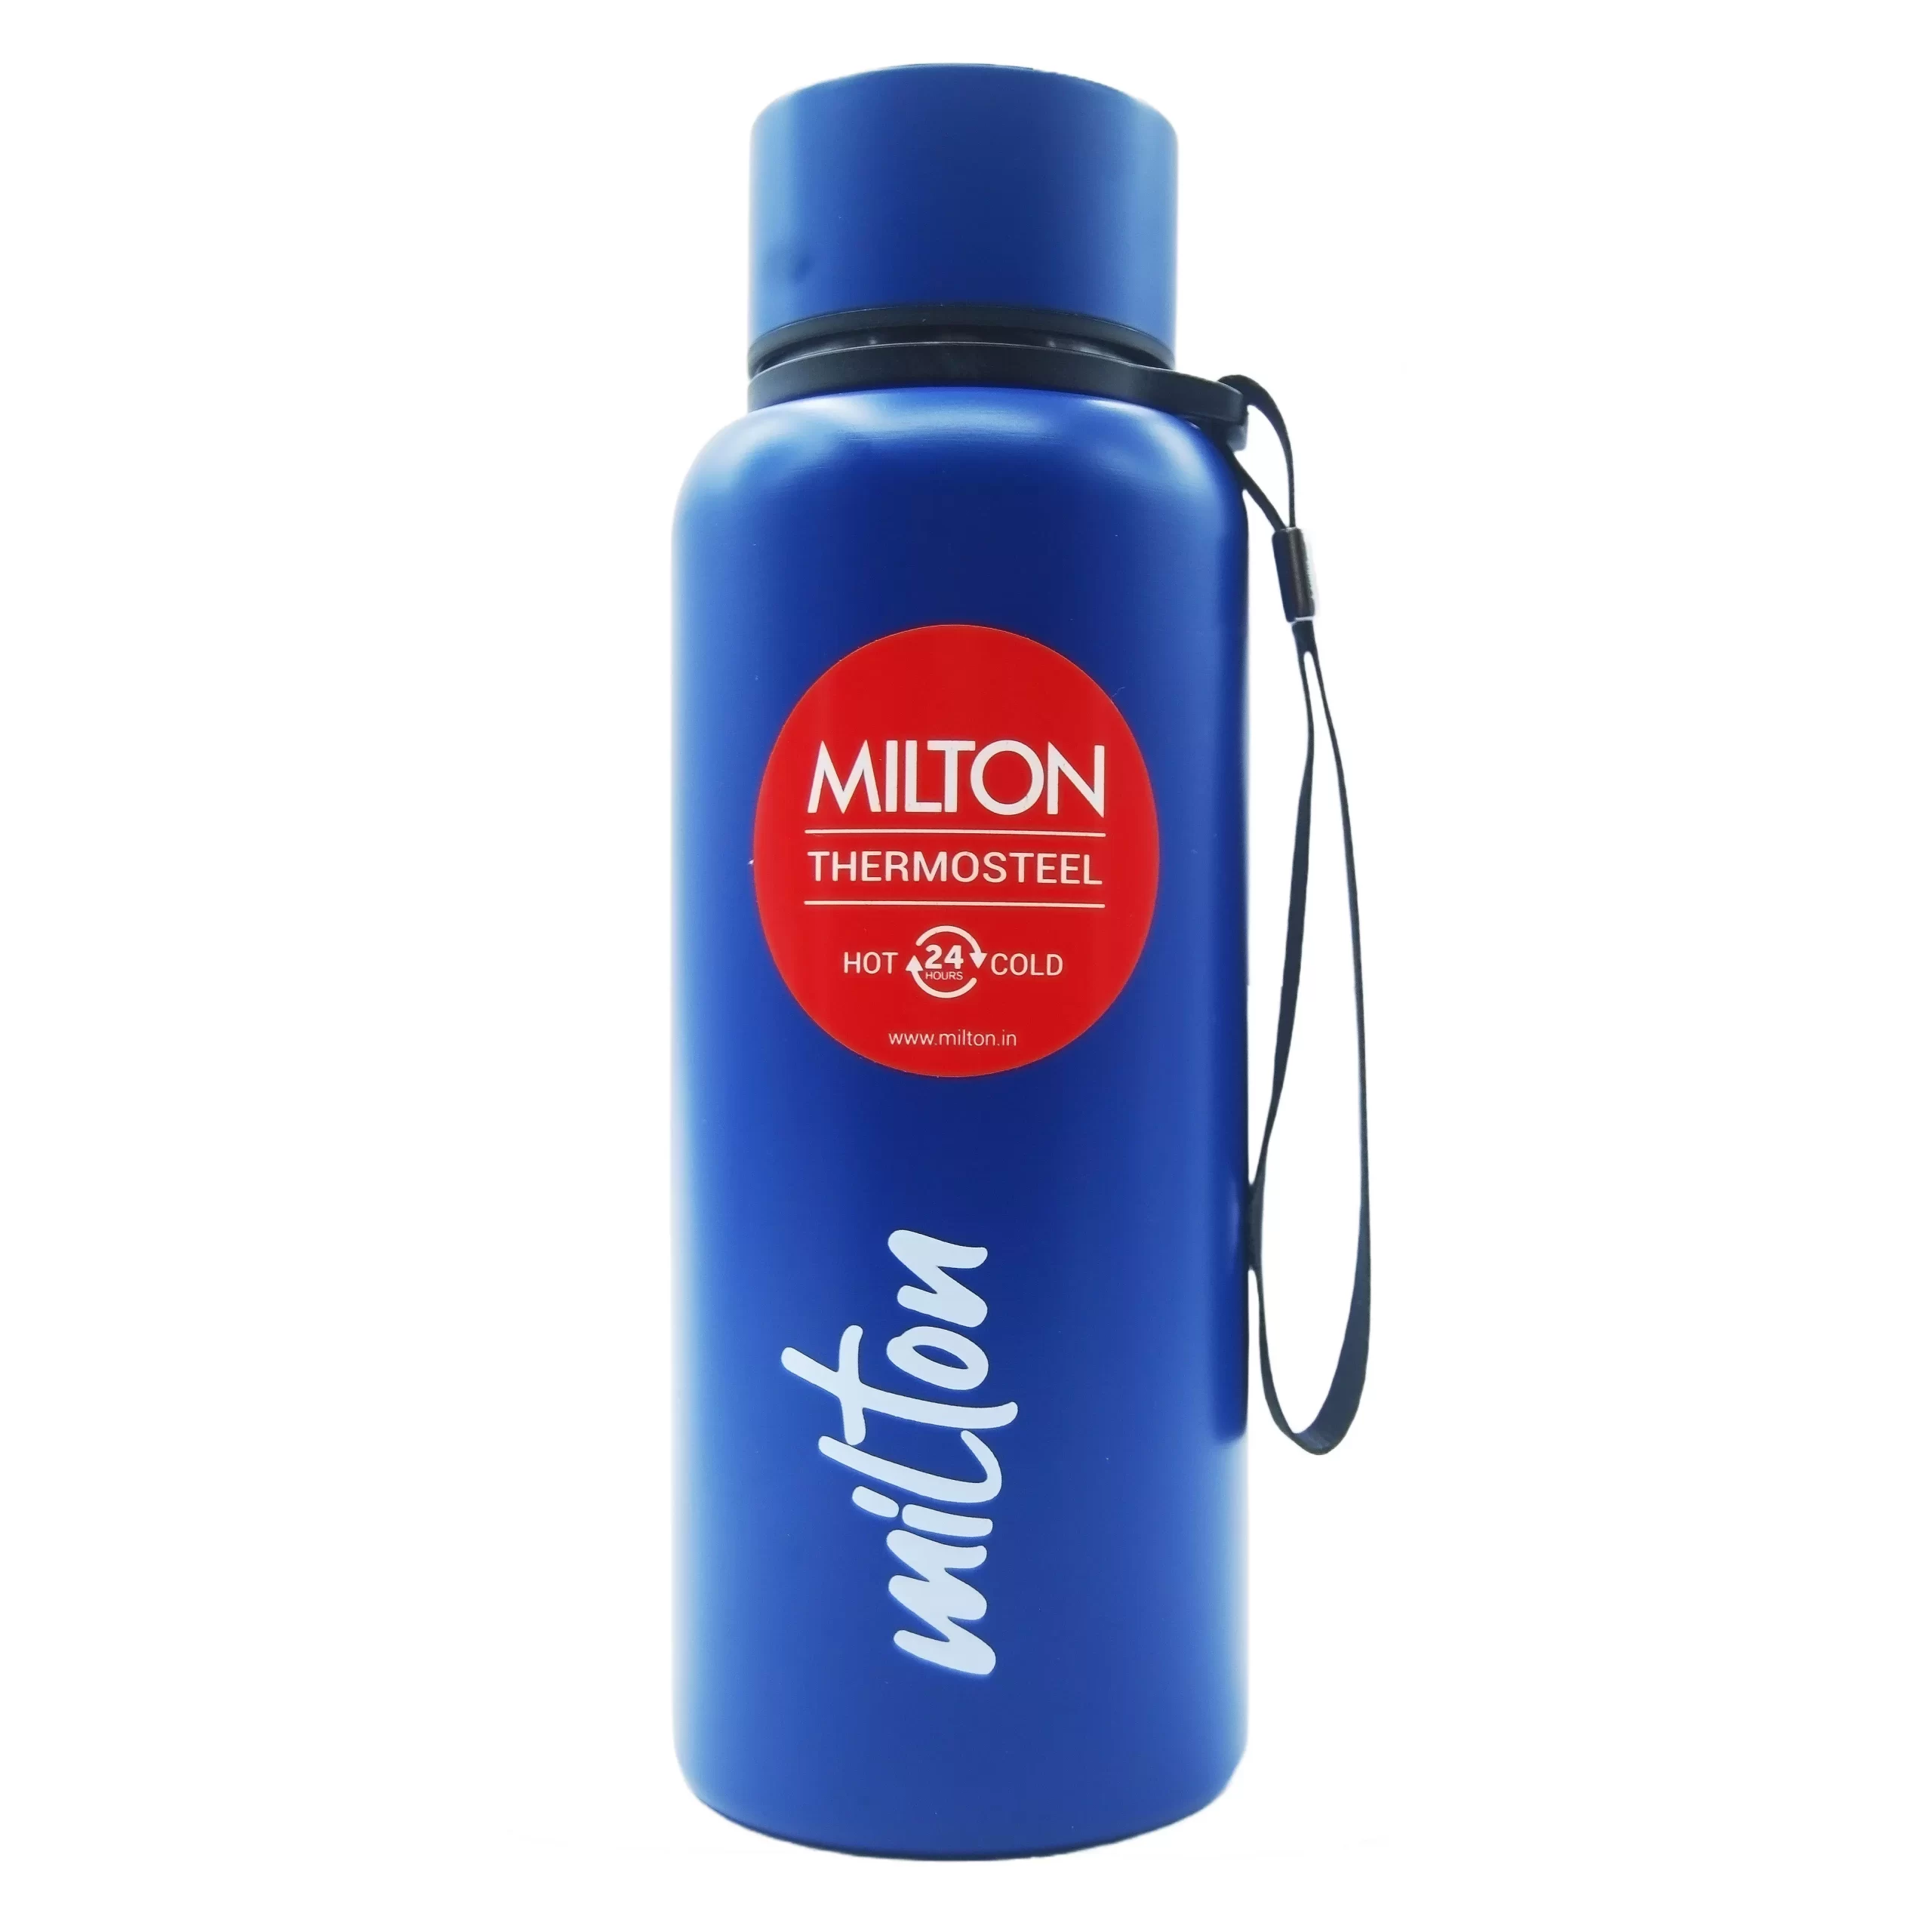 https://leletoday.in/wp-content/uploads/2022/12/Milton-Aura-500-Blue-Thermosteel-Vacuum-Insulated-Bottle-24Hours-Hot-Cold-SS304-Stainless-Steel-520ml-1-scaled.webp